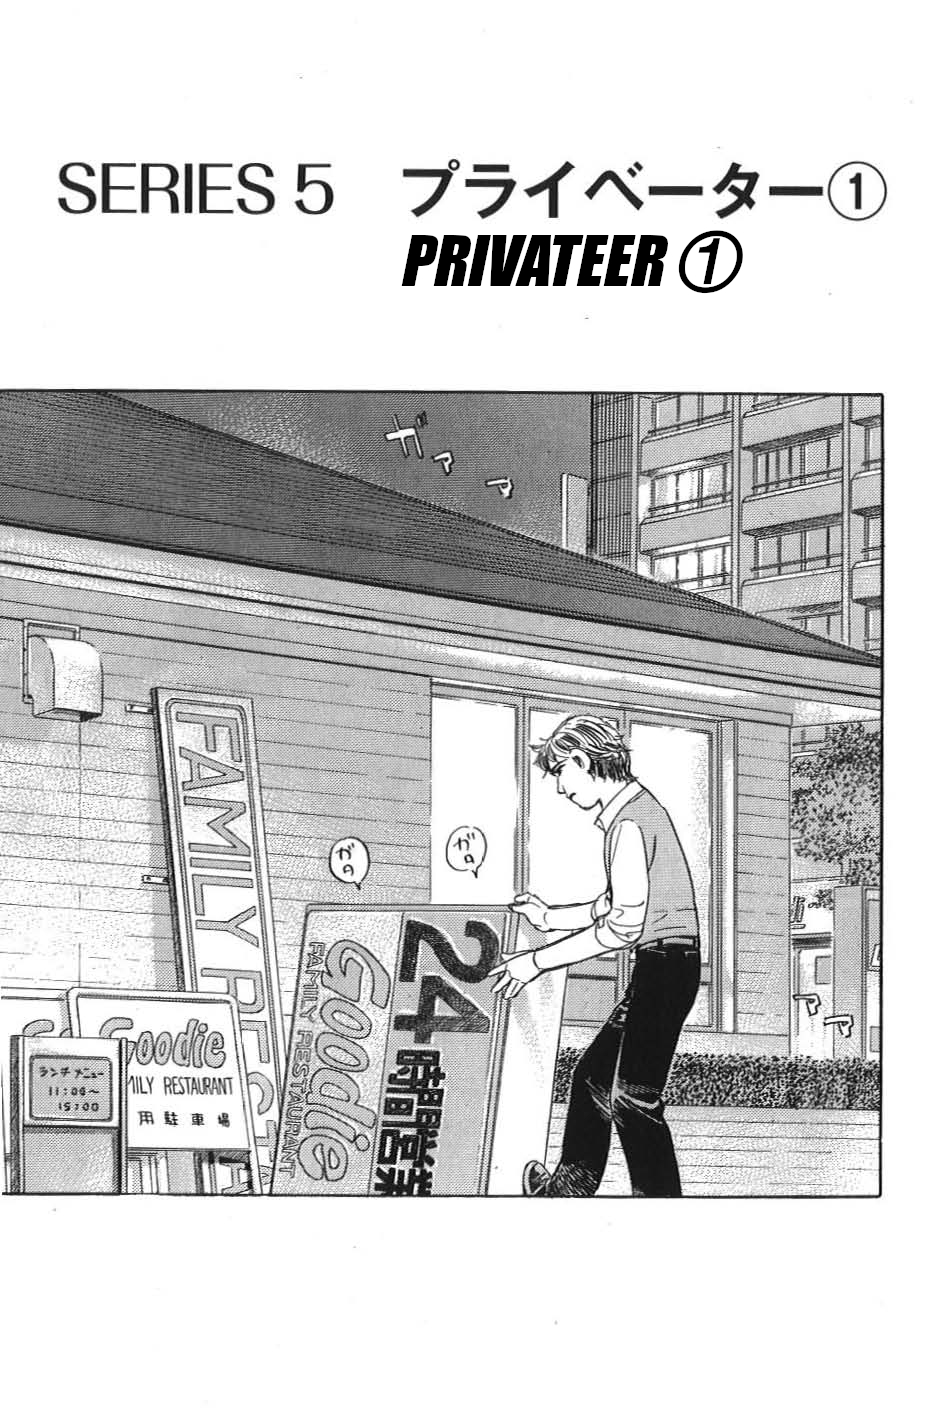 Wangan Midnight: C1 Runner Vol.2 Chapter 15: Privateer ① - Picture 1